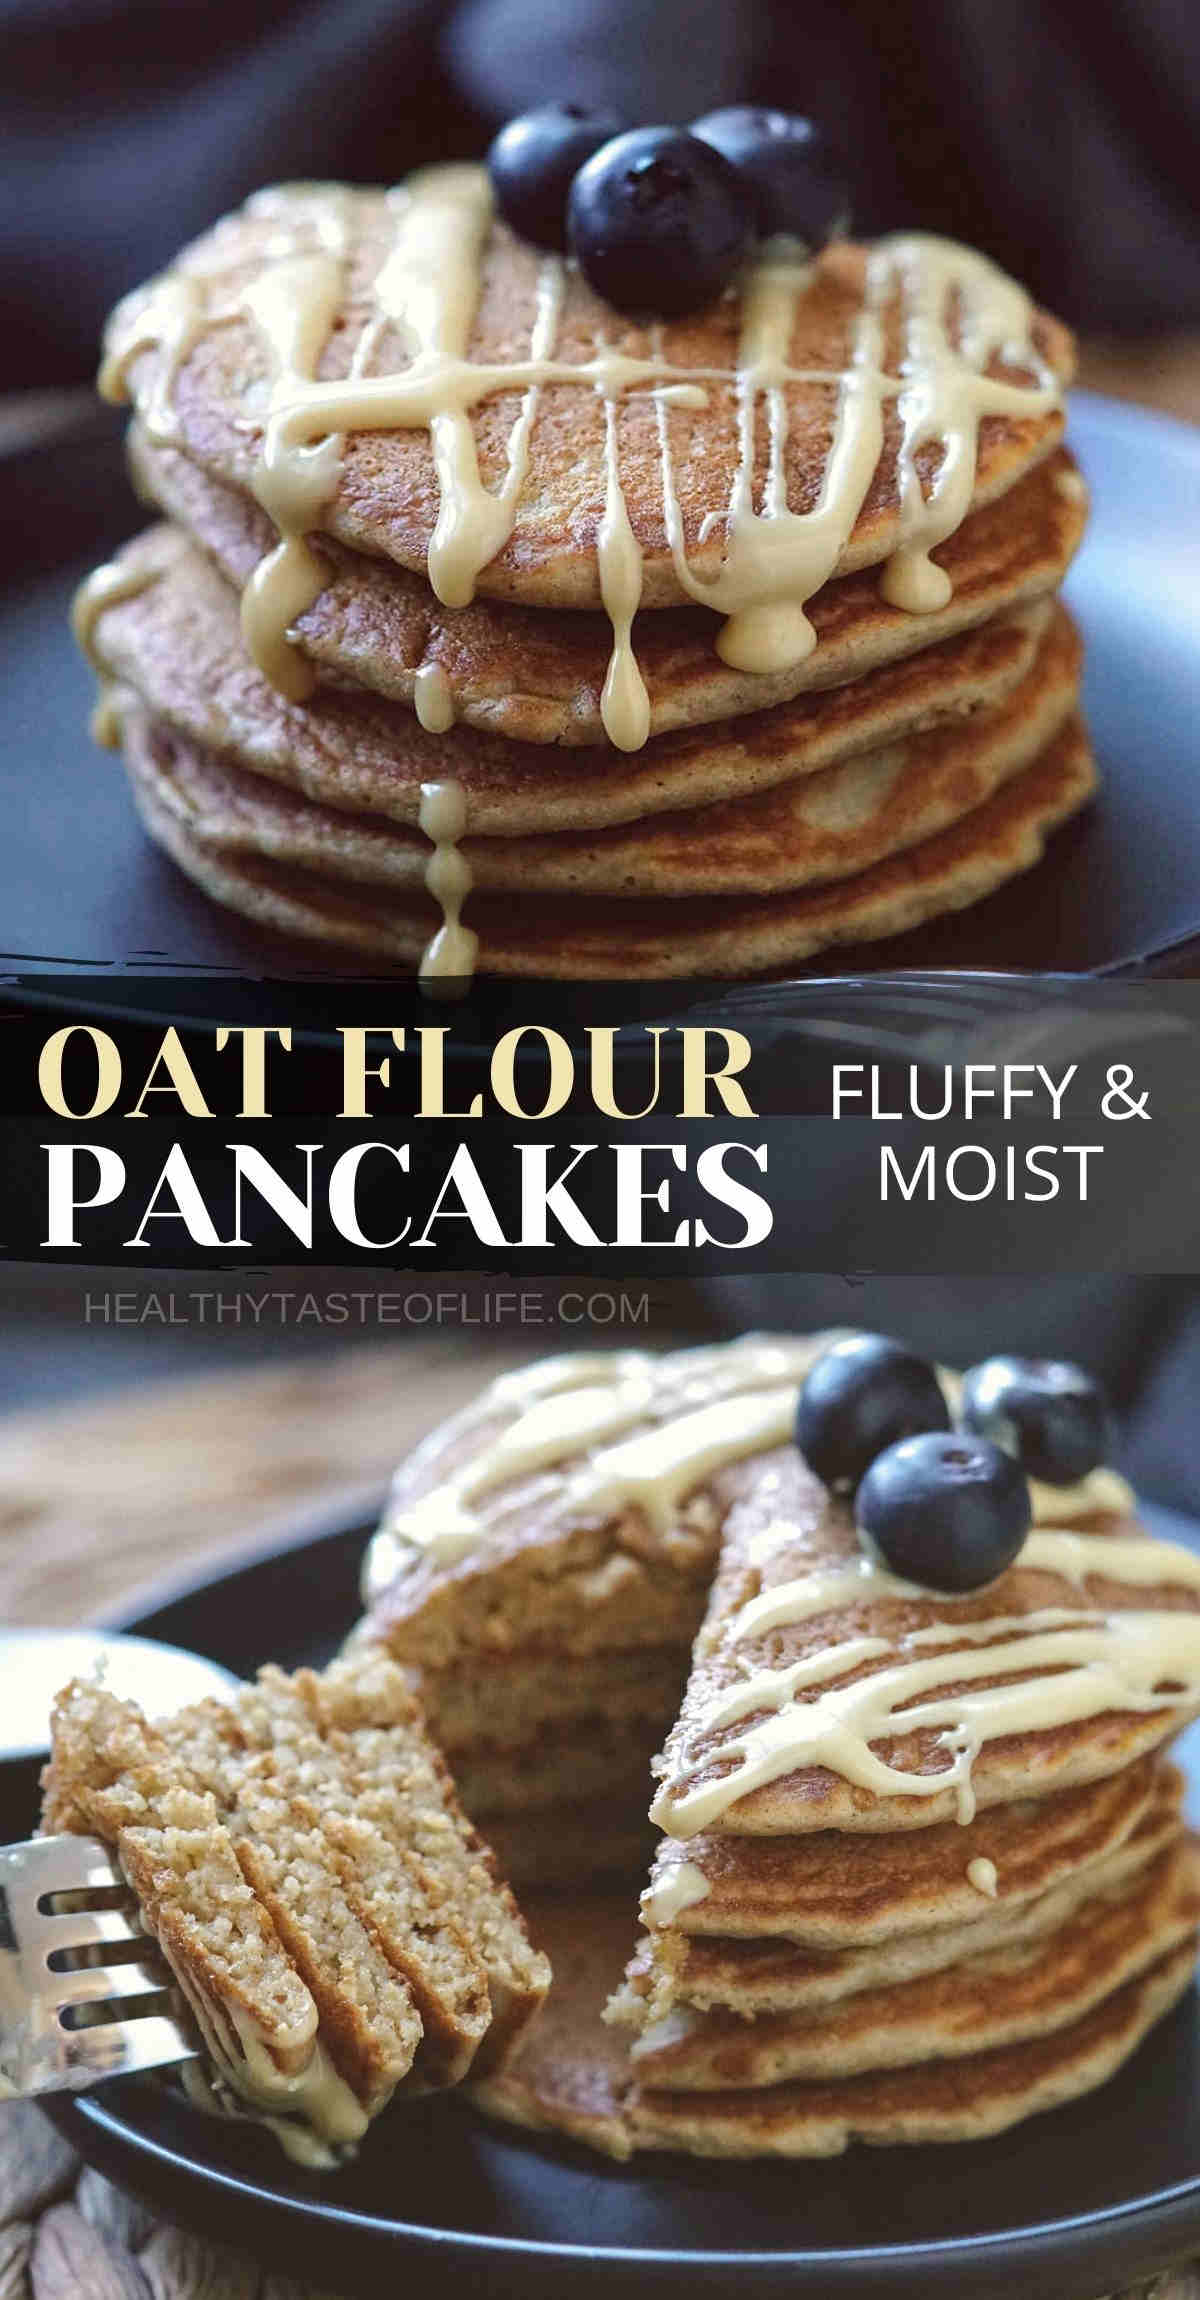 This oat flour pancake recipe yields fluffy & moist pancakes with the perfect balance of sweet and tang. These oat flour pancakes are made with gluten free rolled oats & a dairy free buttermilk alternative that mimics the same texture and acidity. The recipe makes a huge stack of perfect fluffy oatmeal flour pancakes in just under 1 hour. Prfect for a weekend breakfast for adults & kids. #oatflourpancakes #pancakeswithoatflour #glutenfreepancakes #dairyfreepancakes #oatmealpancakes #oatpancakes